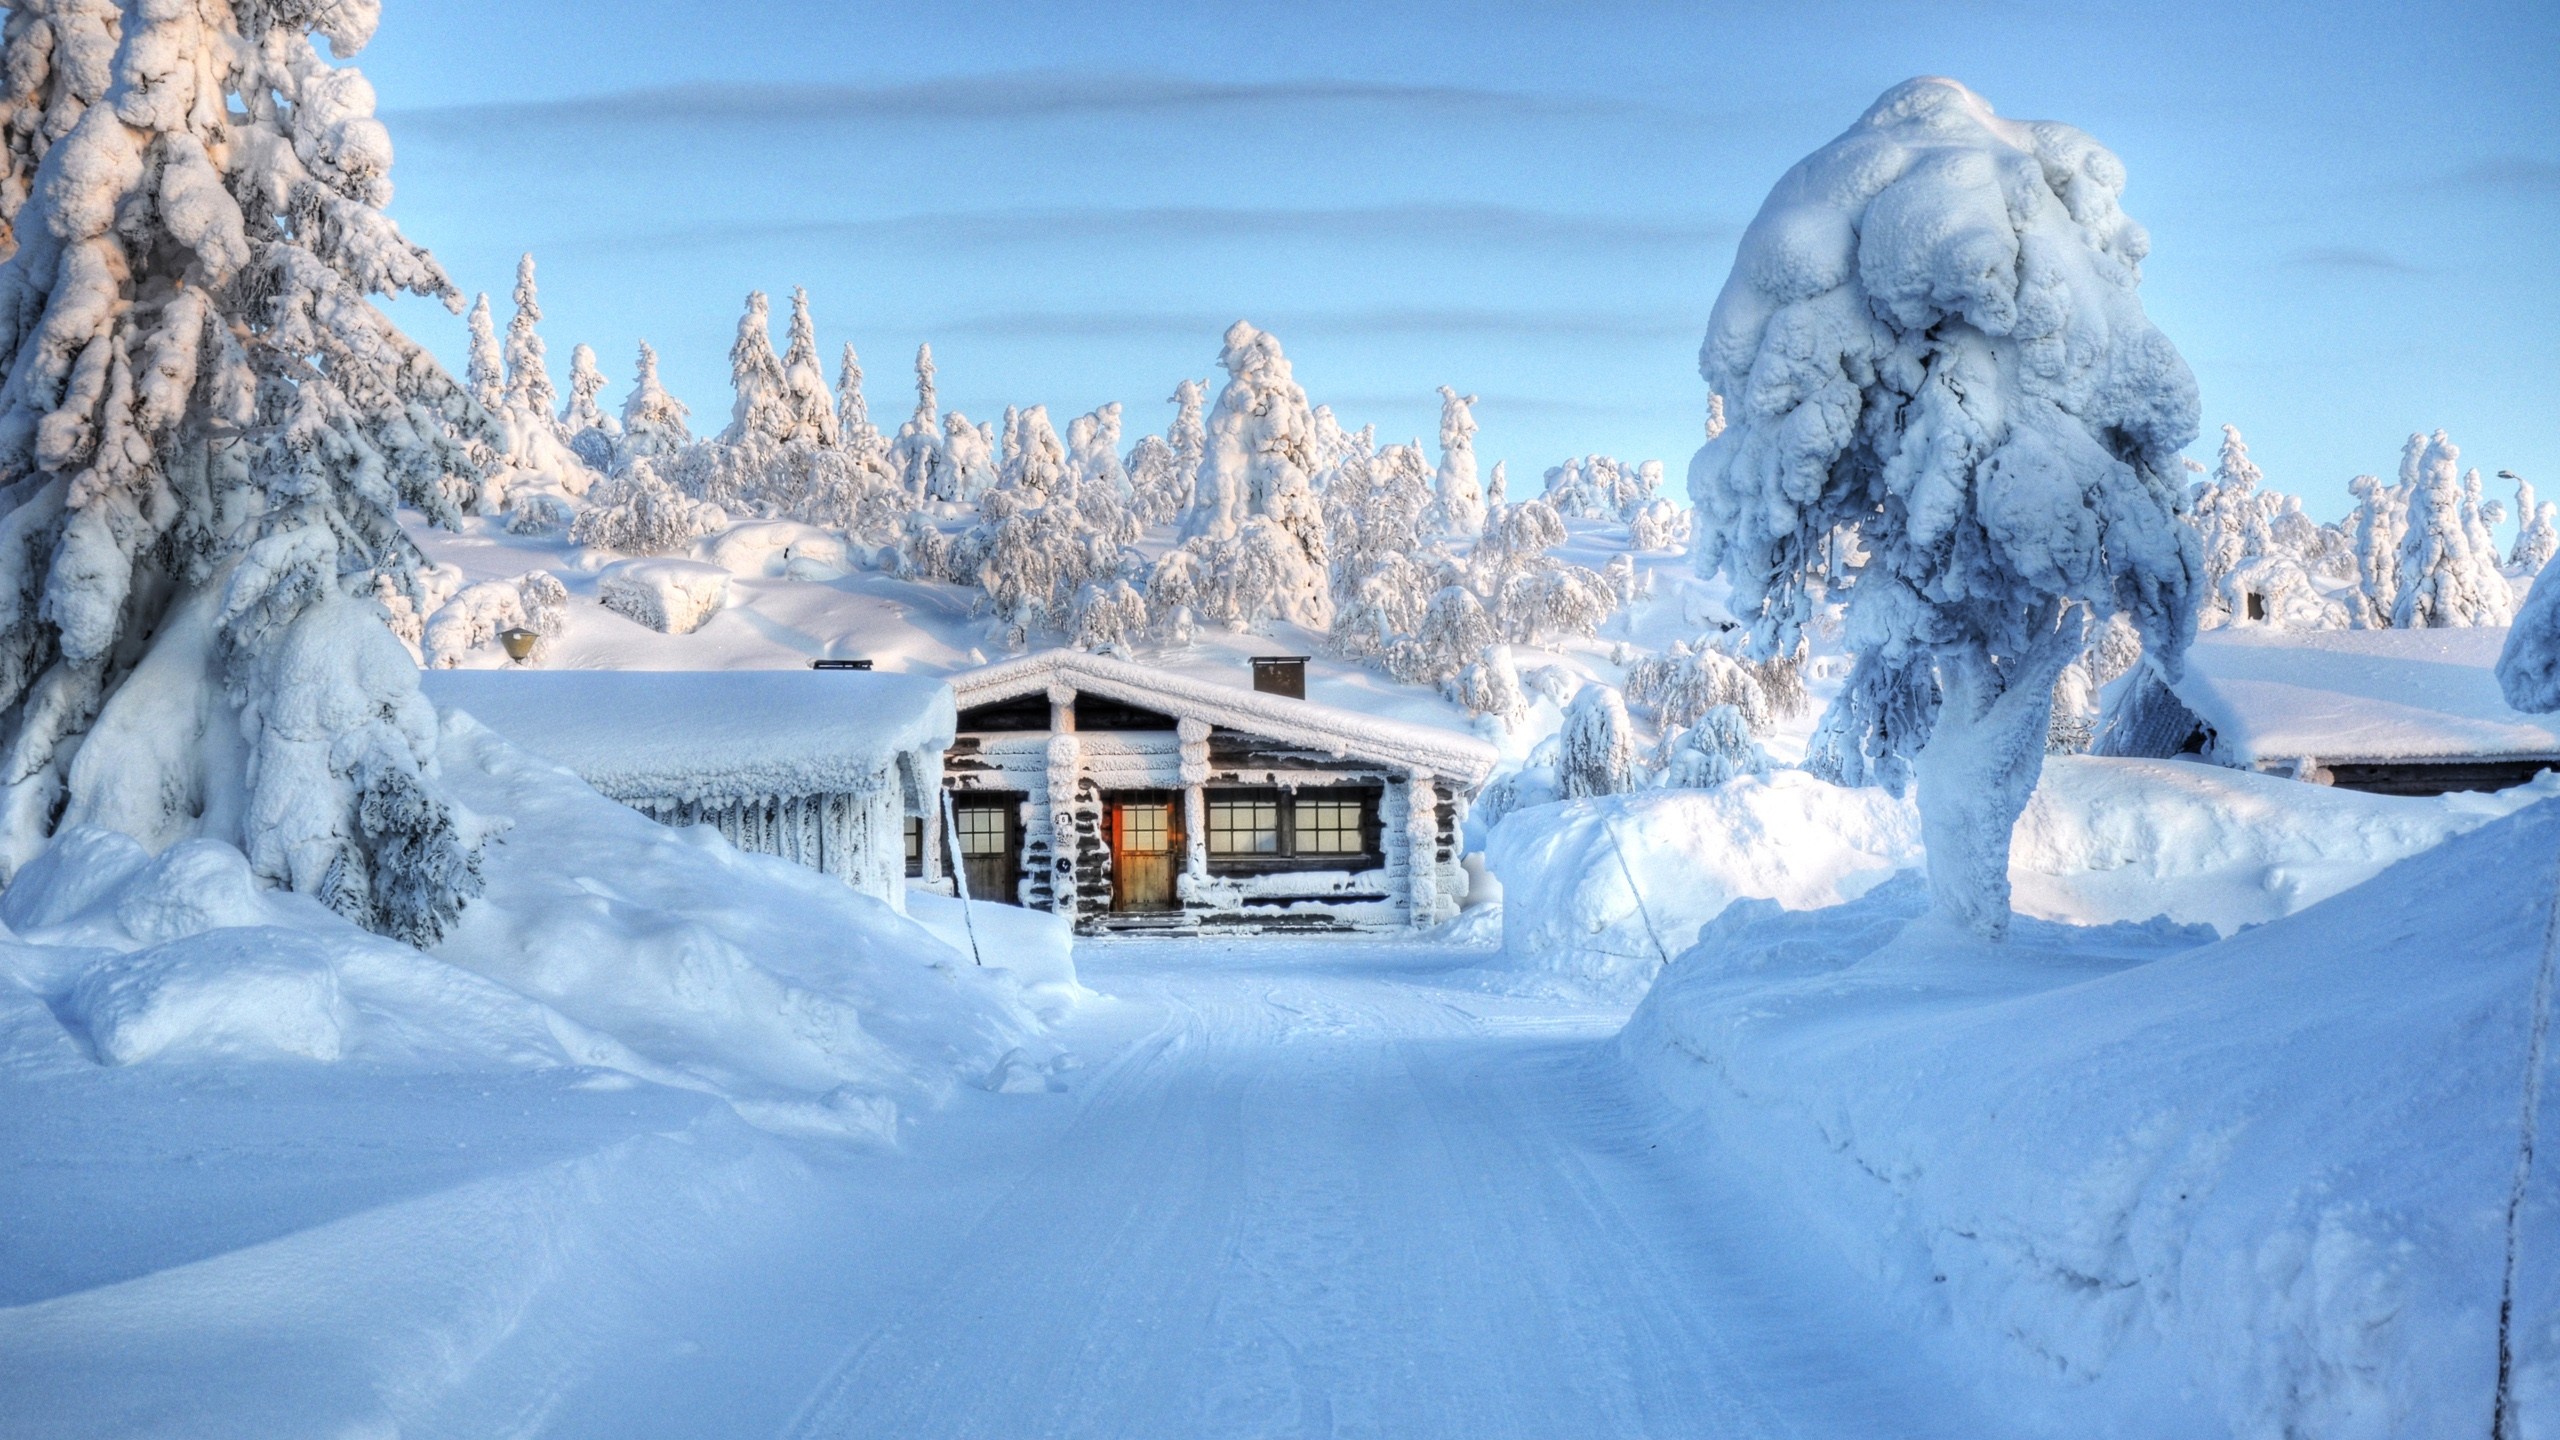 photography, winter, cabin, house, snow